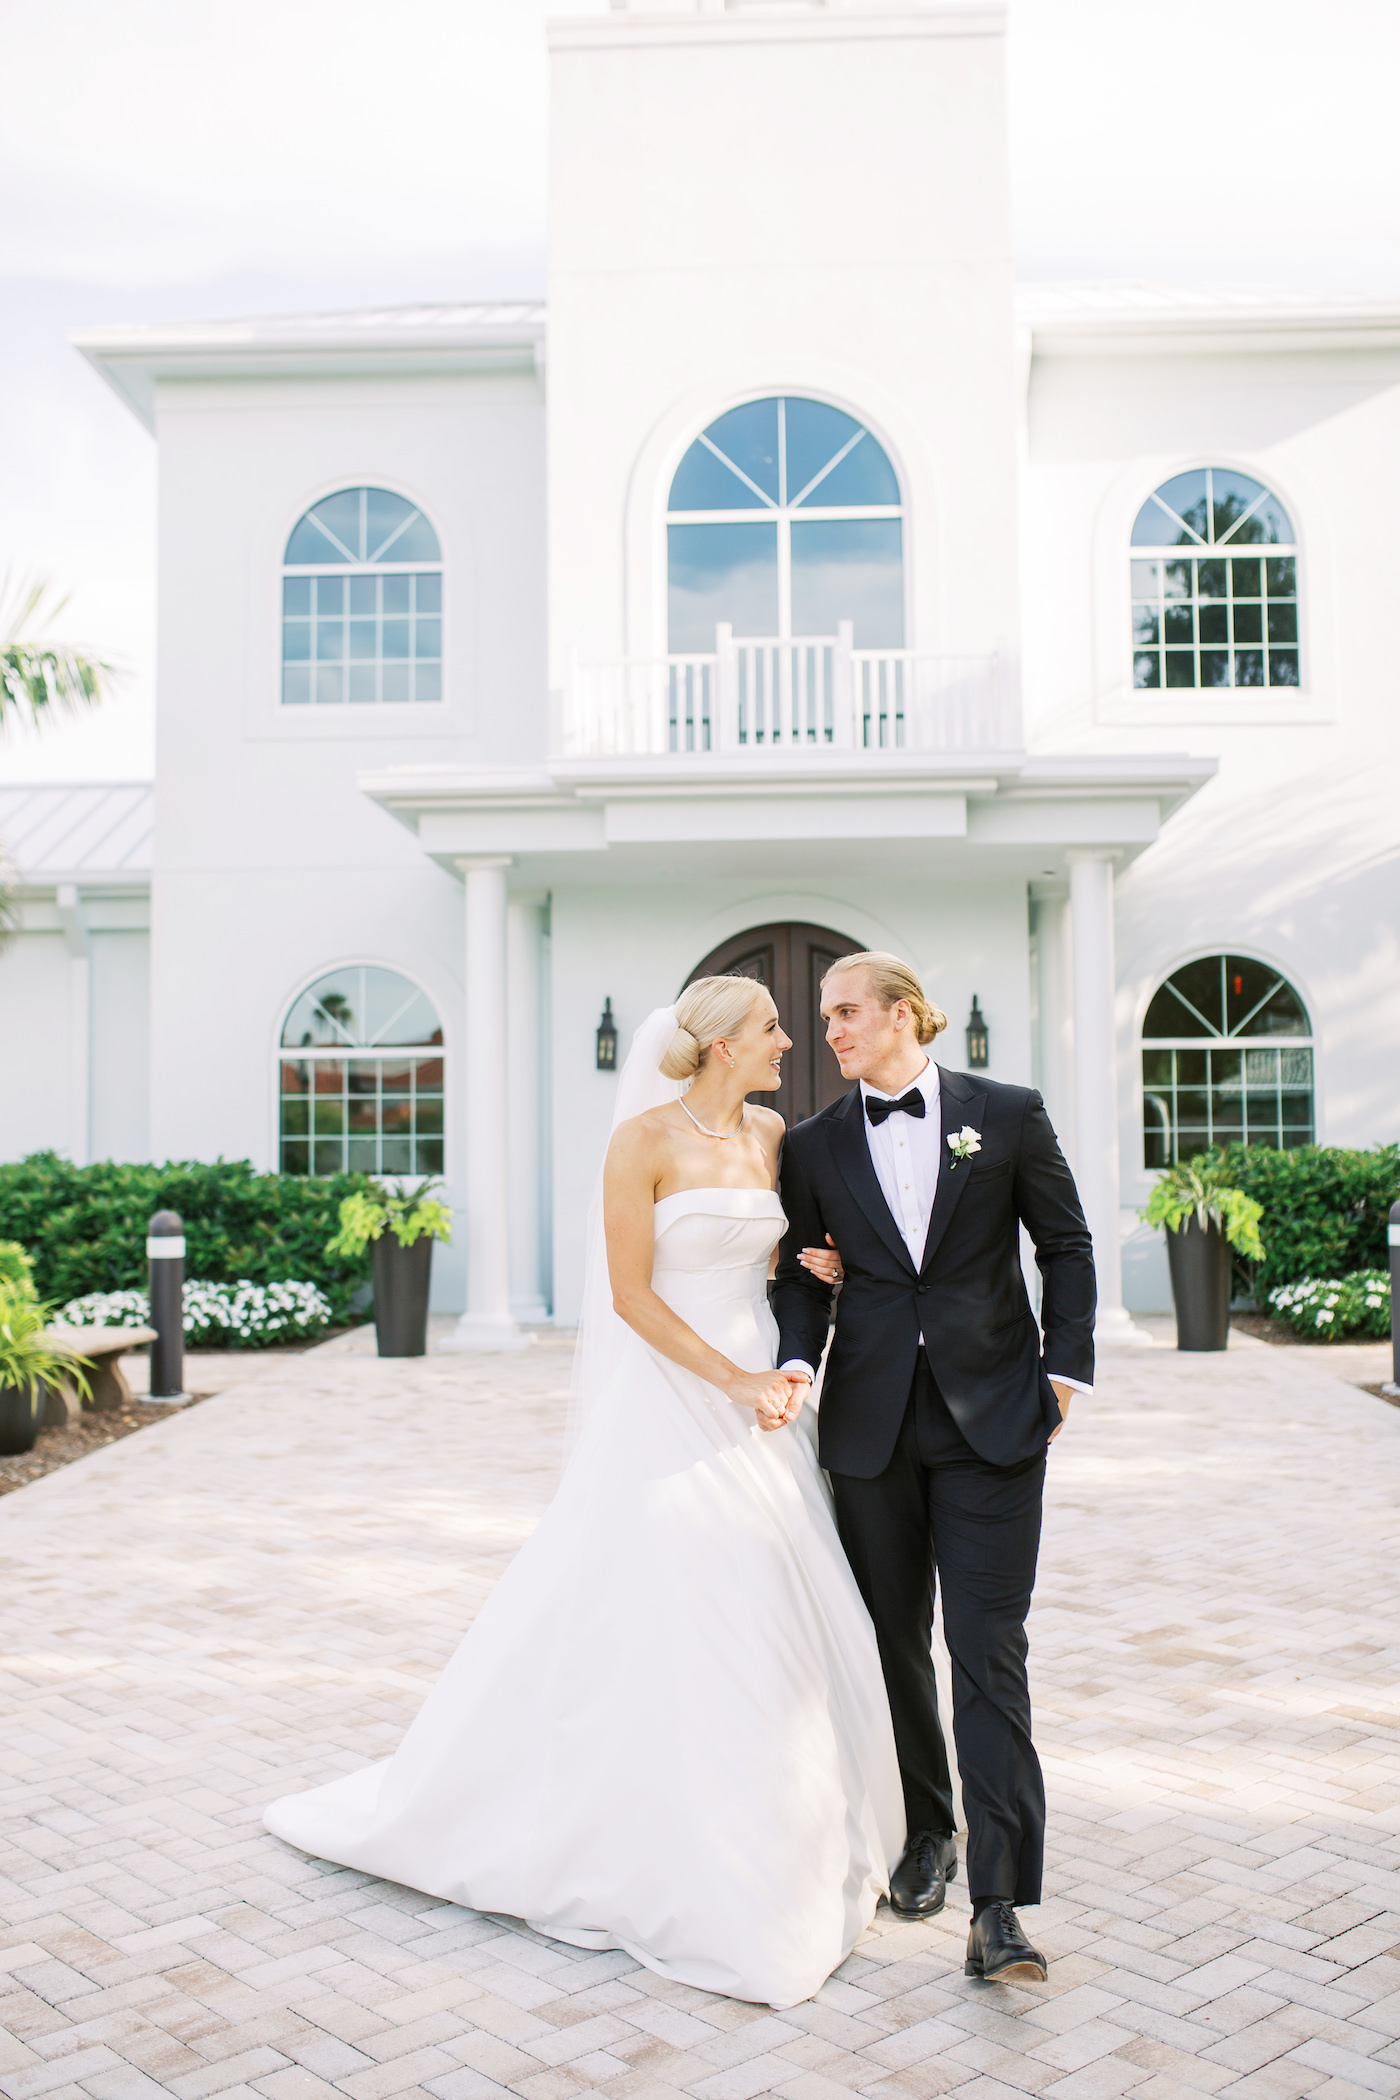 White Strapless A-Line Wedding Dress and Black Tuxedo for Classic Wedding | Tampa Bay Planner Parties A La Carte